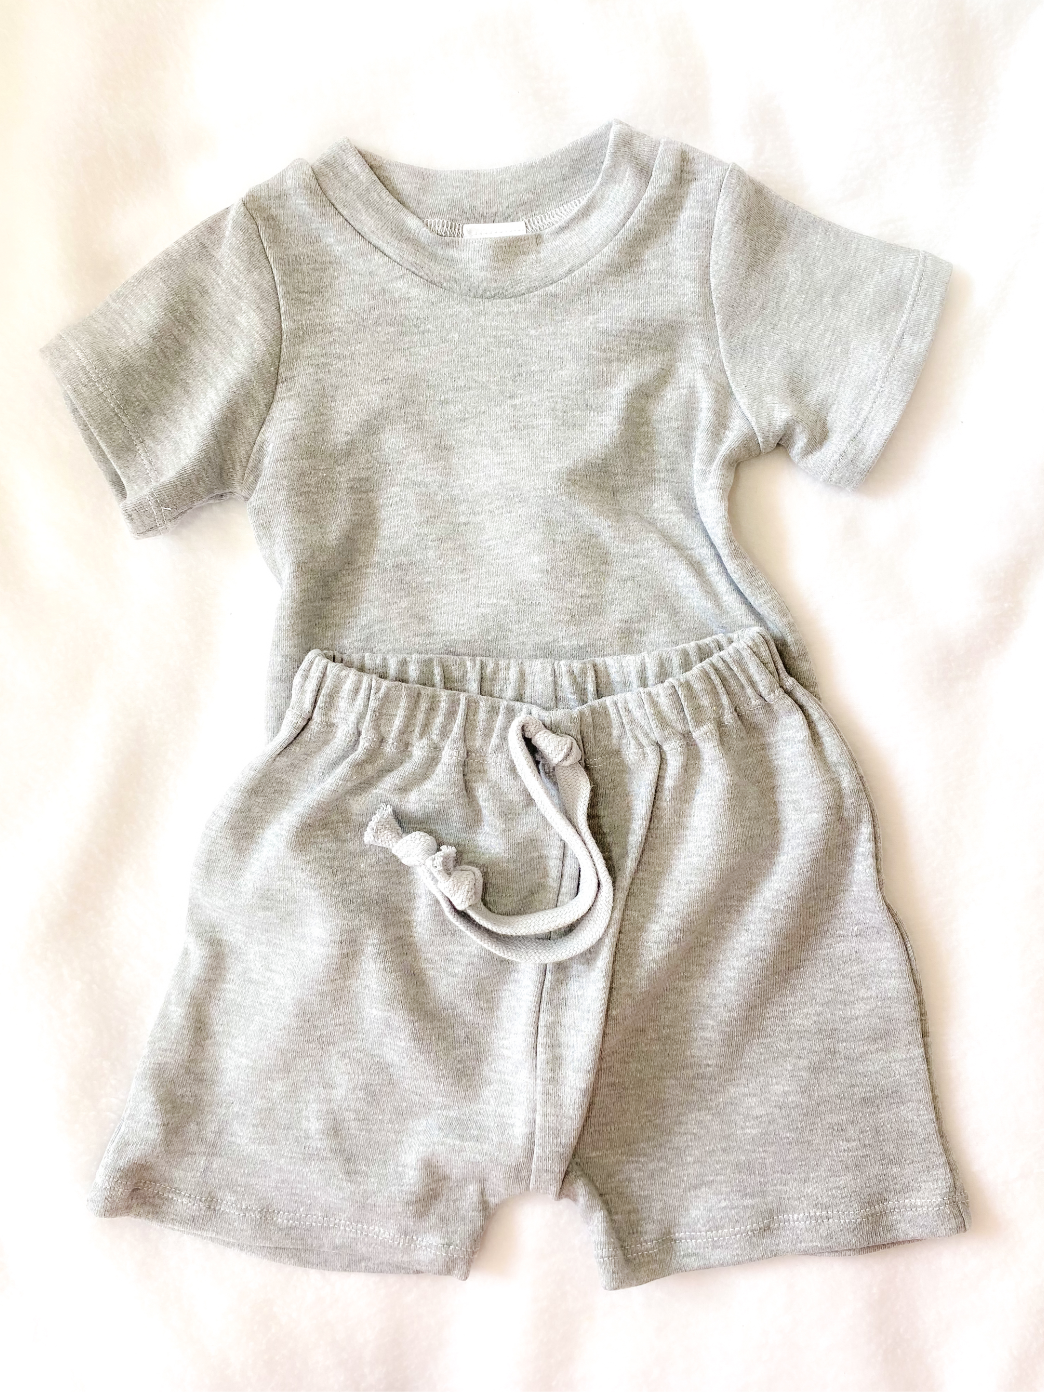 Two-piece Shorts and Tee Set - Melange Grey